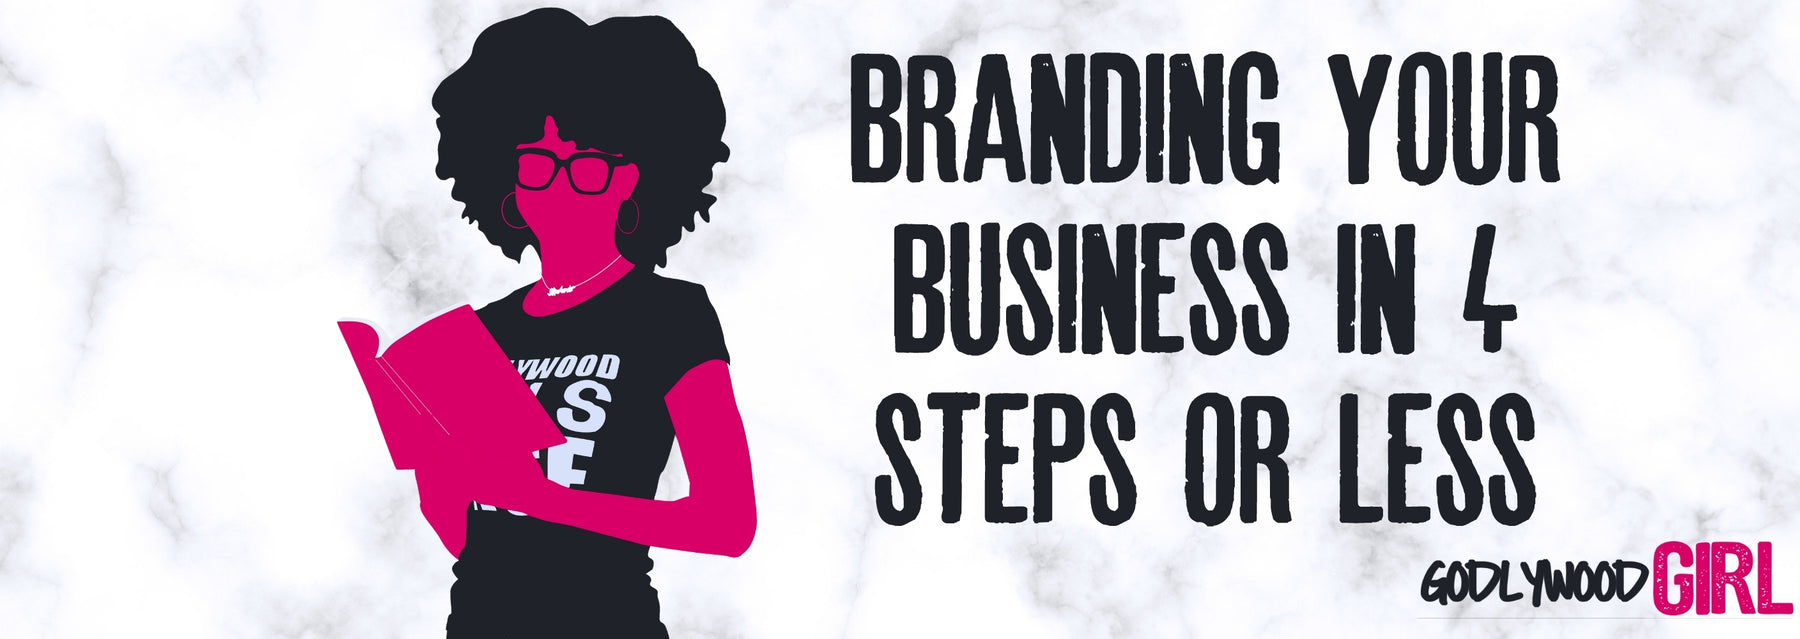 BRANDING YOUR BUSINESS | 4 Ways To Improve Your Brand As A Christian Entrepreneur